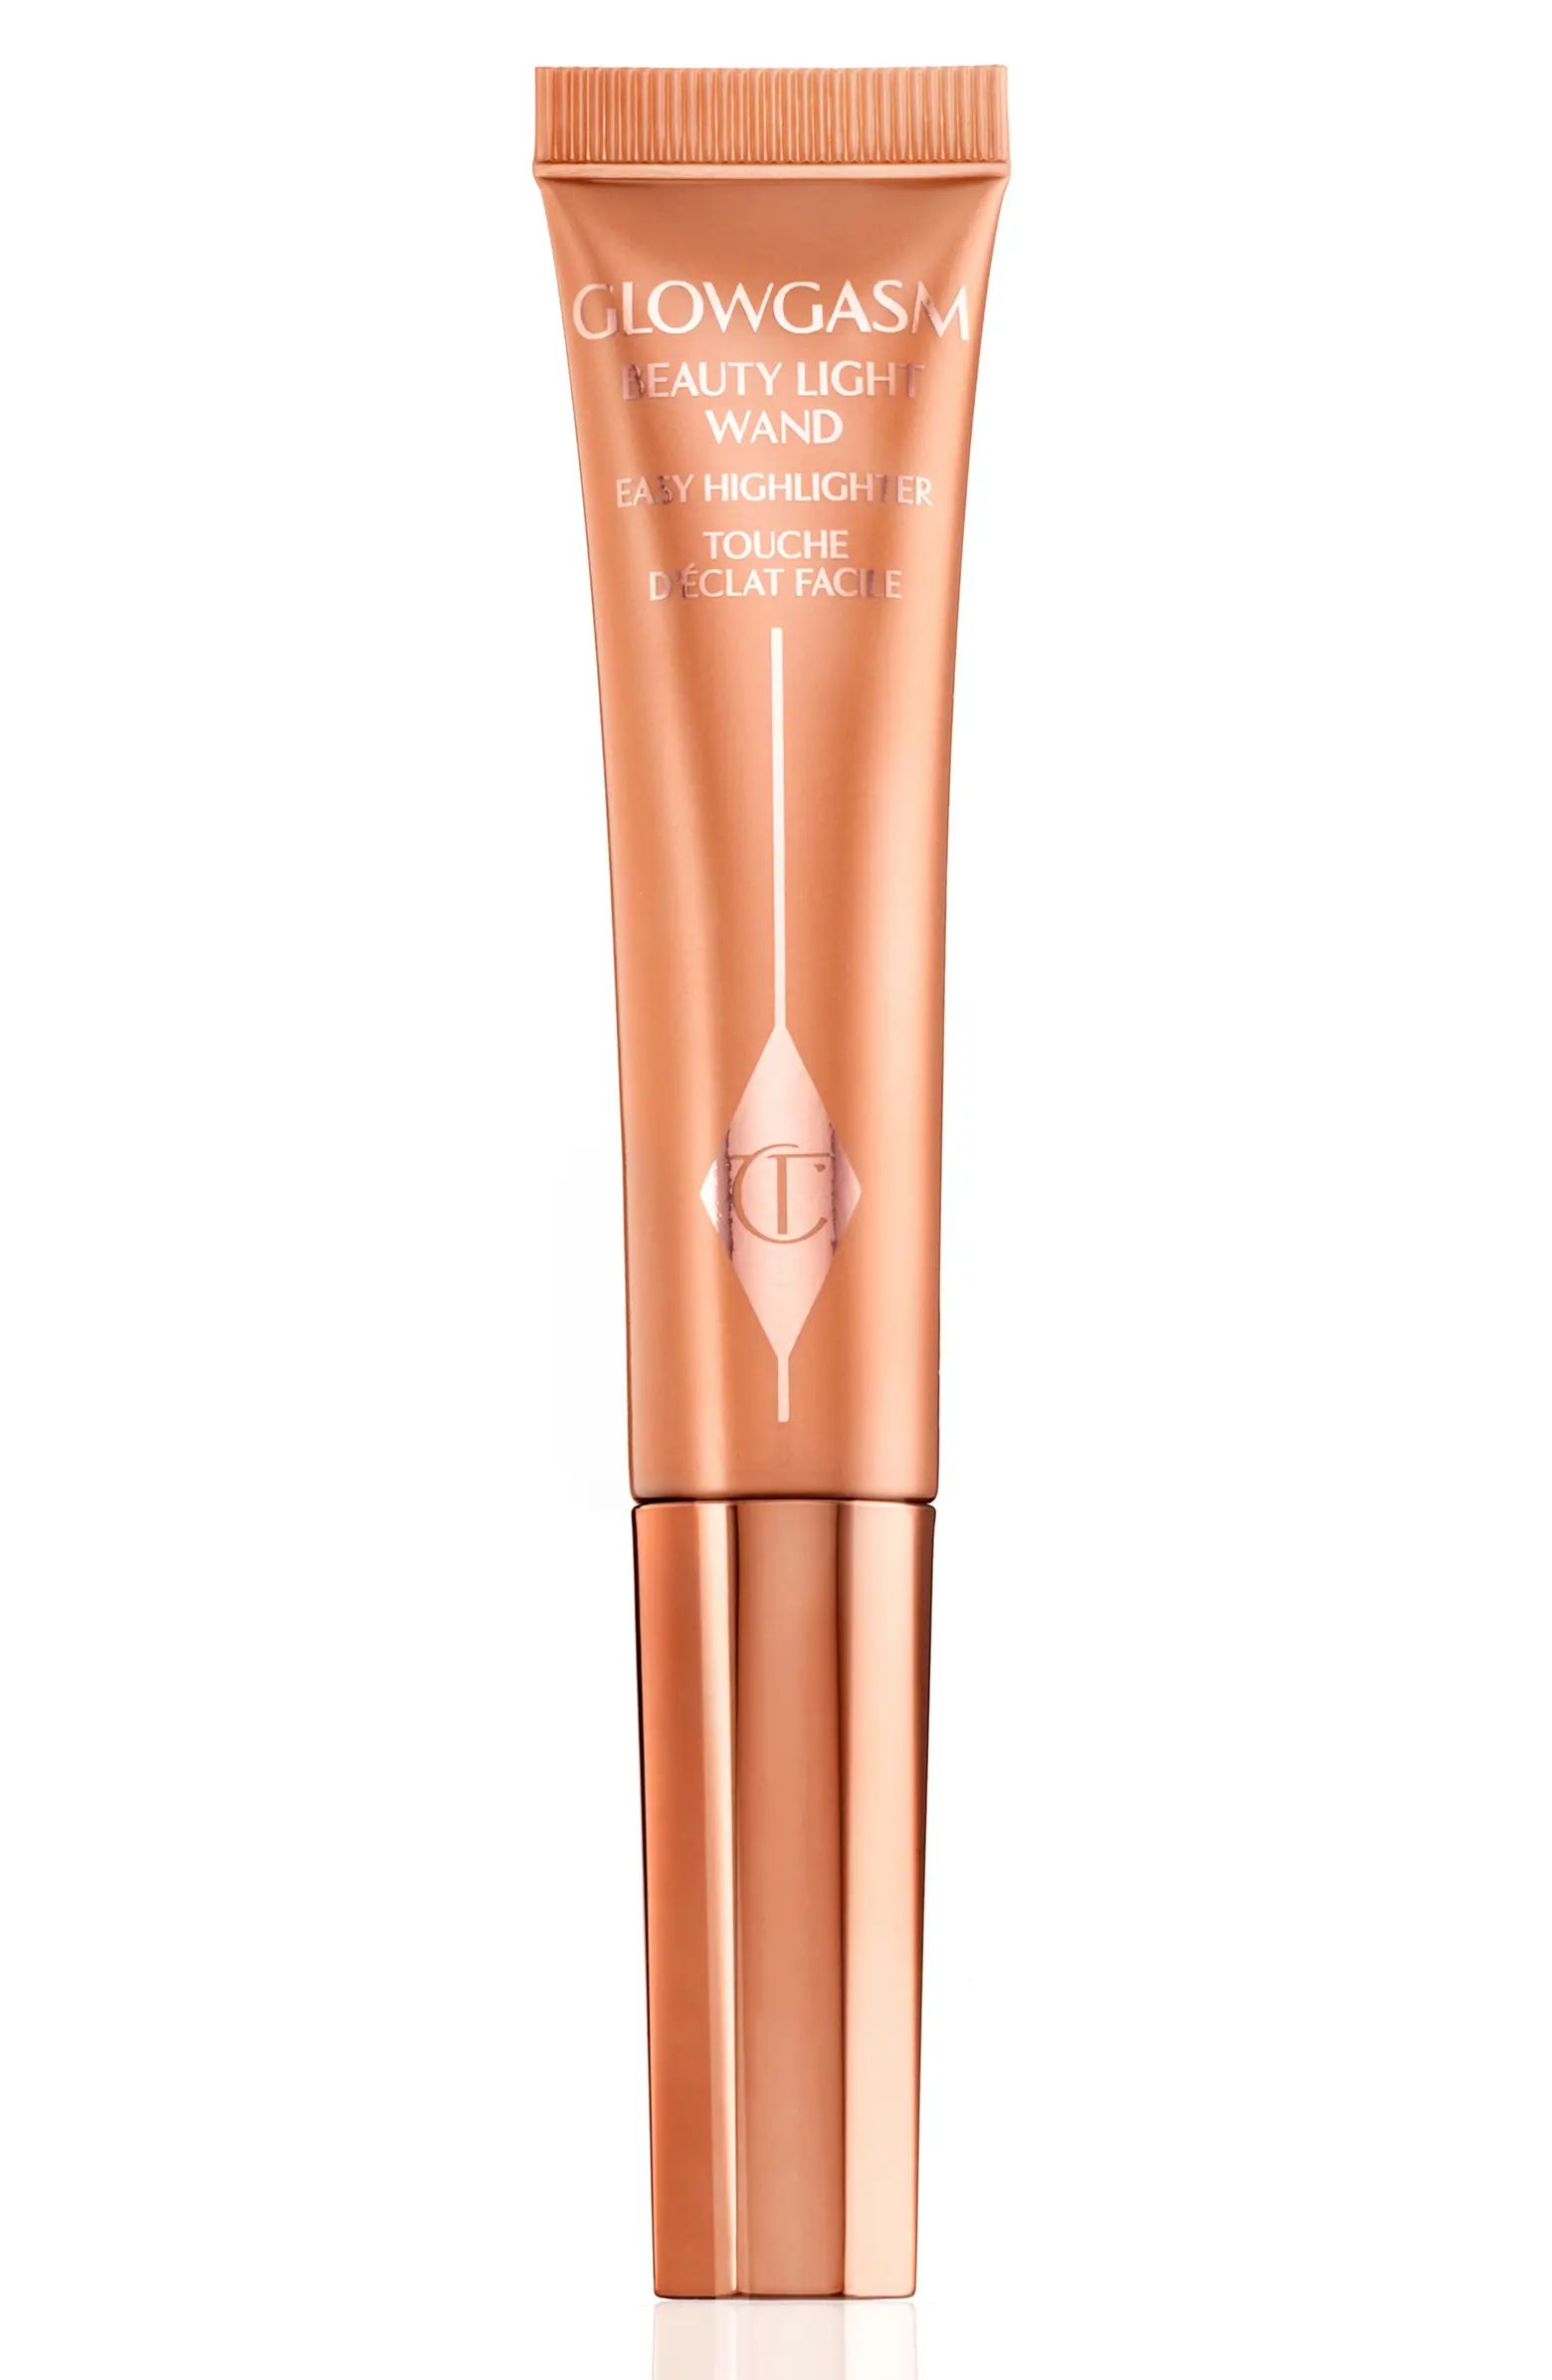 Glowgasm Beauty Wand Highlighter | Nordstrom